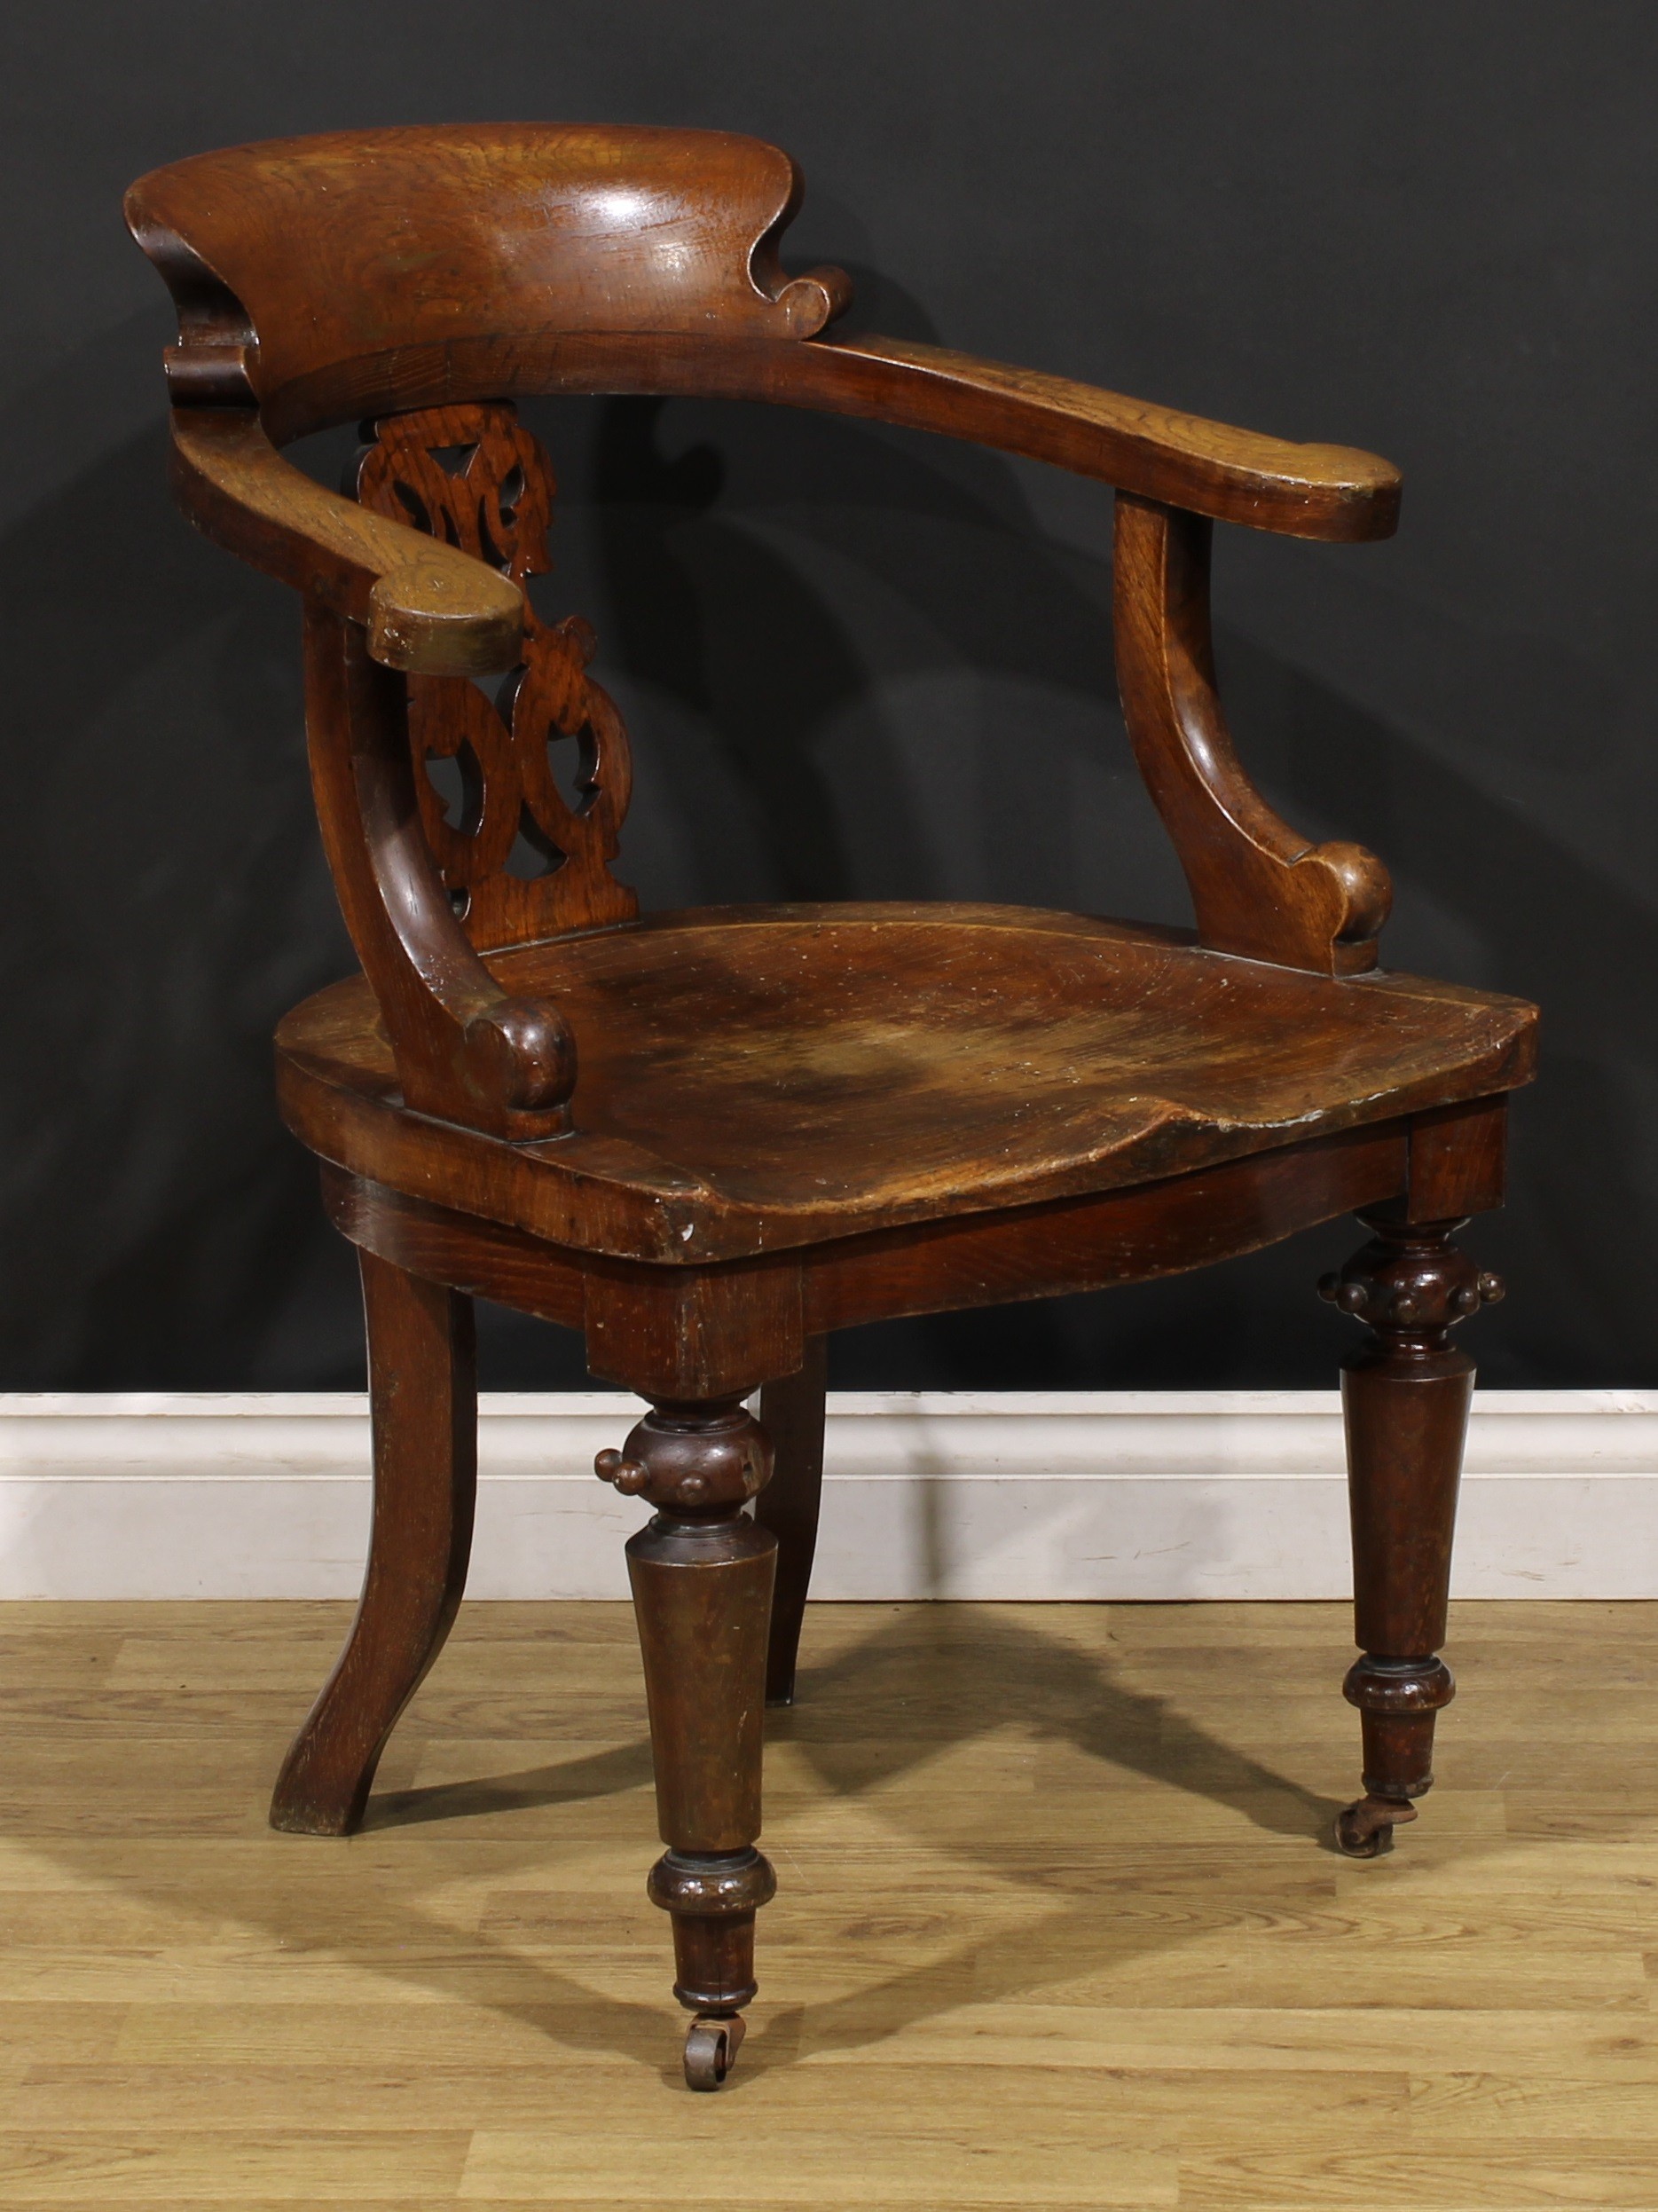 A Victorian oak desk chair, by Thomas Simpson & Sons, Halifax, Yorkshire (fl.1876-1954), badged, - Image 2 of 4